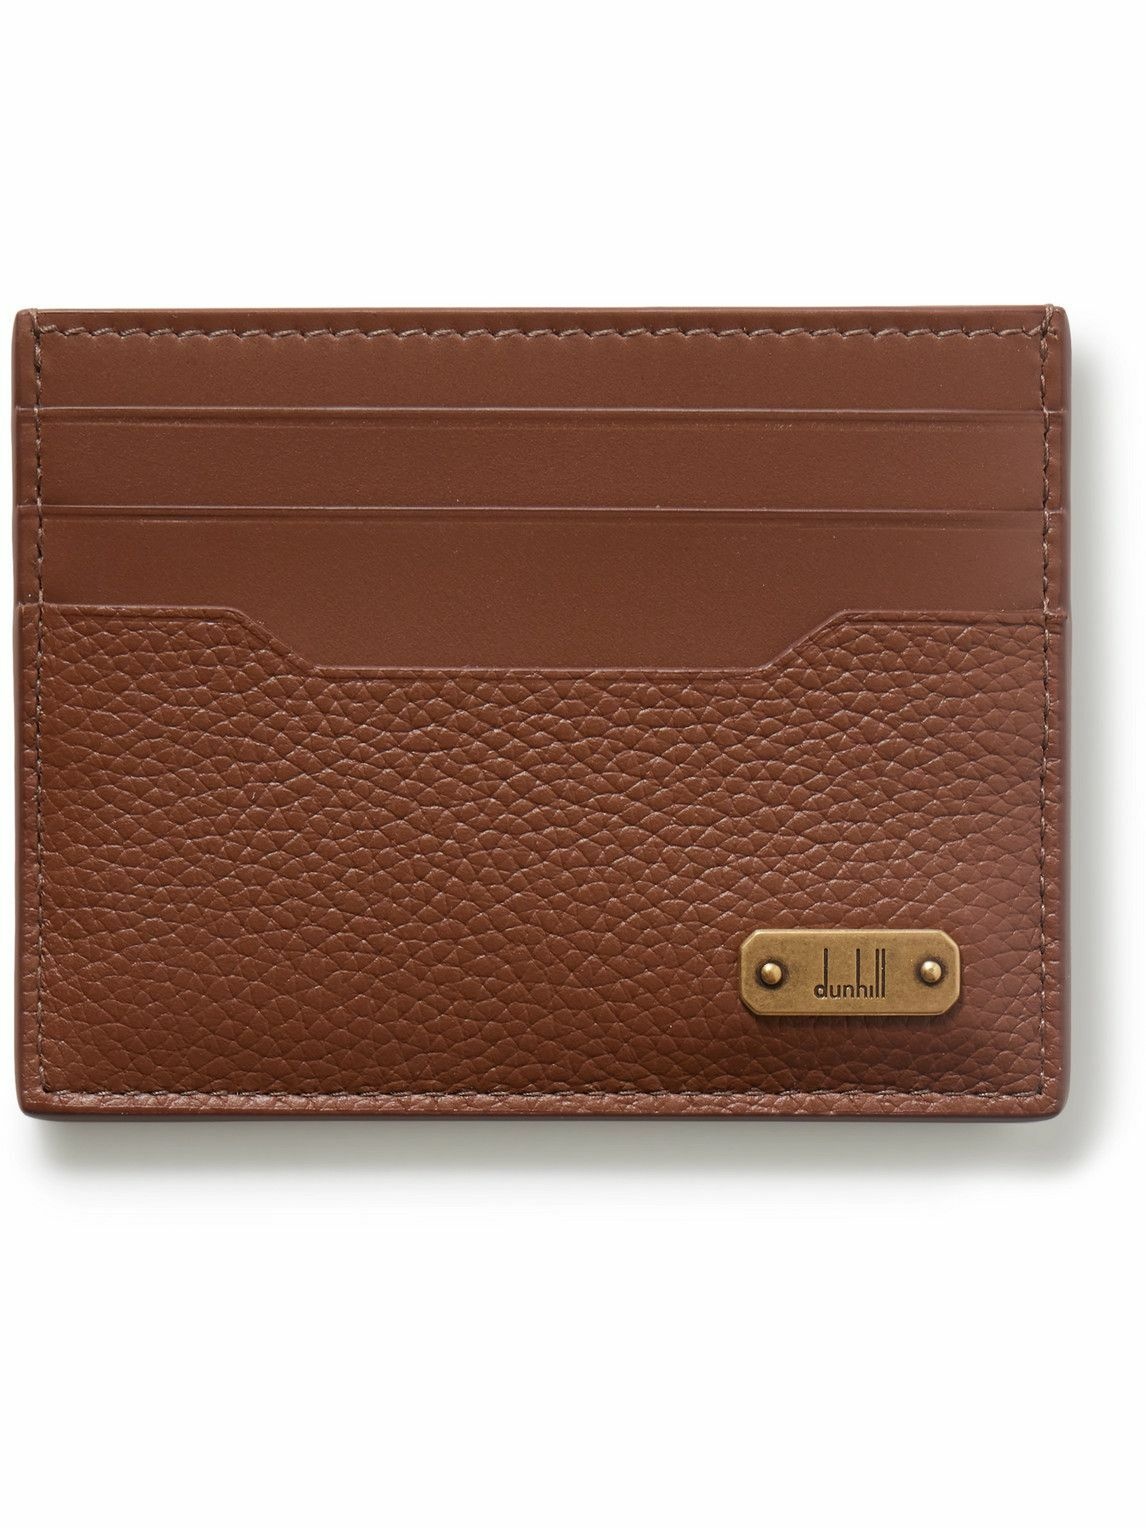 Photo: Dunhill - 1893 Harness Pebble-Grain Leather Cardholder